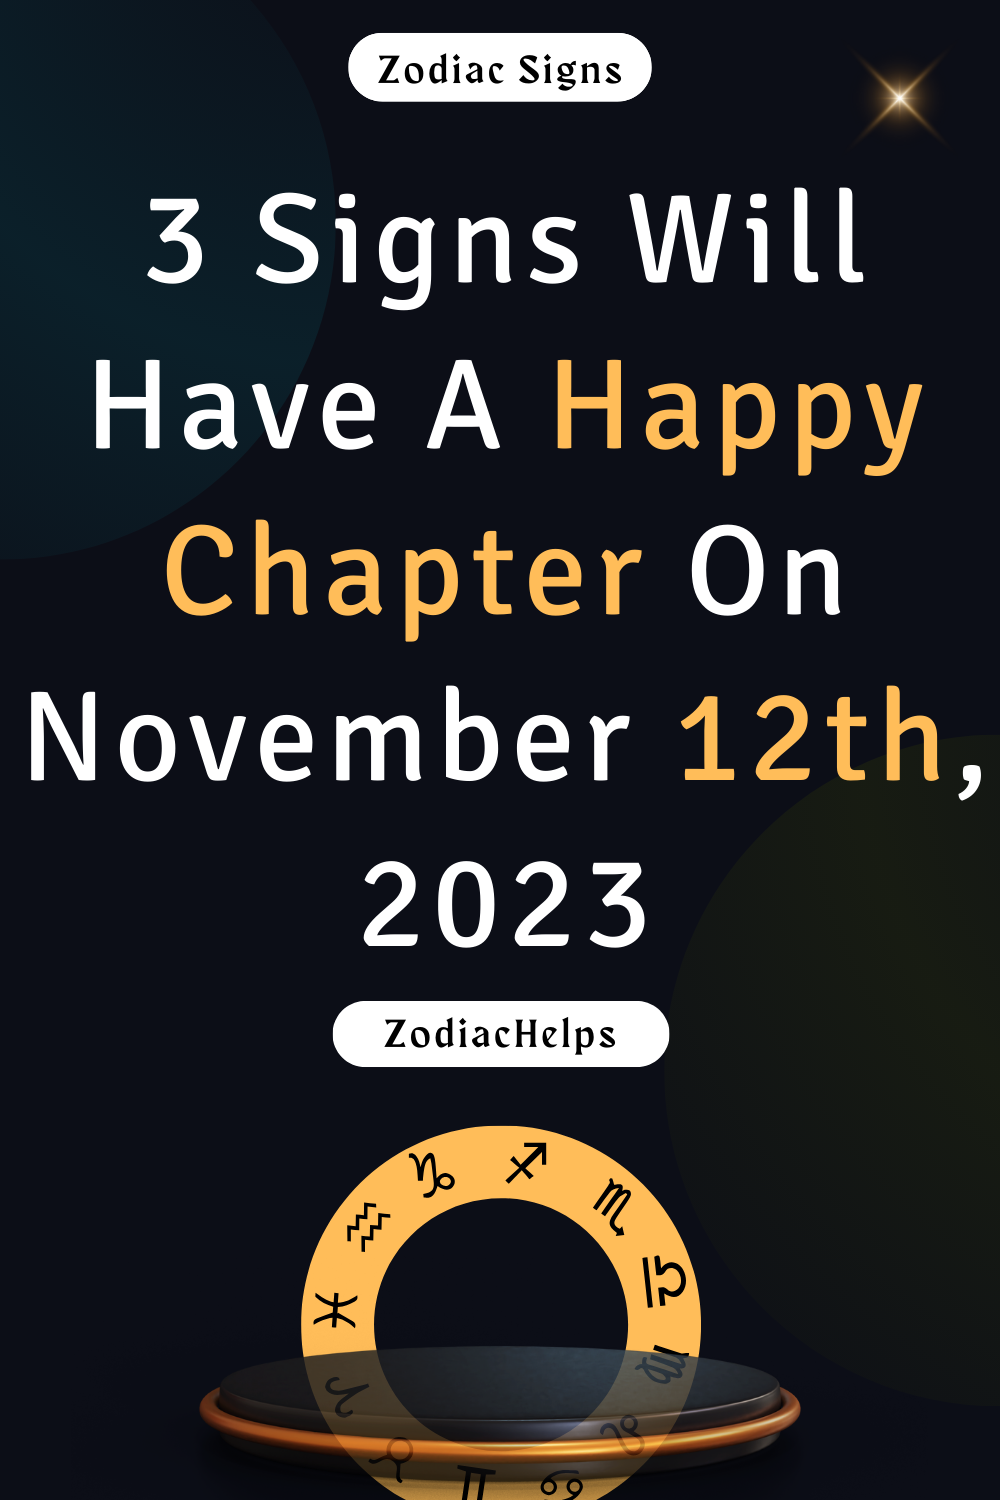 3 Signs Will Have A Happy Chapter On November 12th, 2023